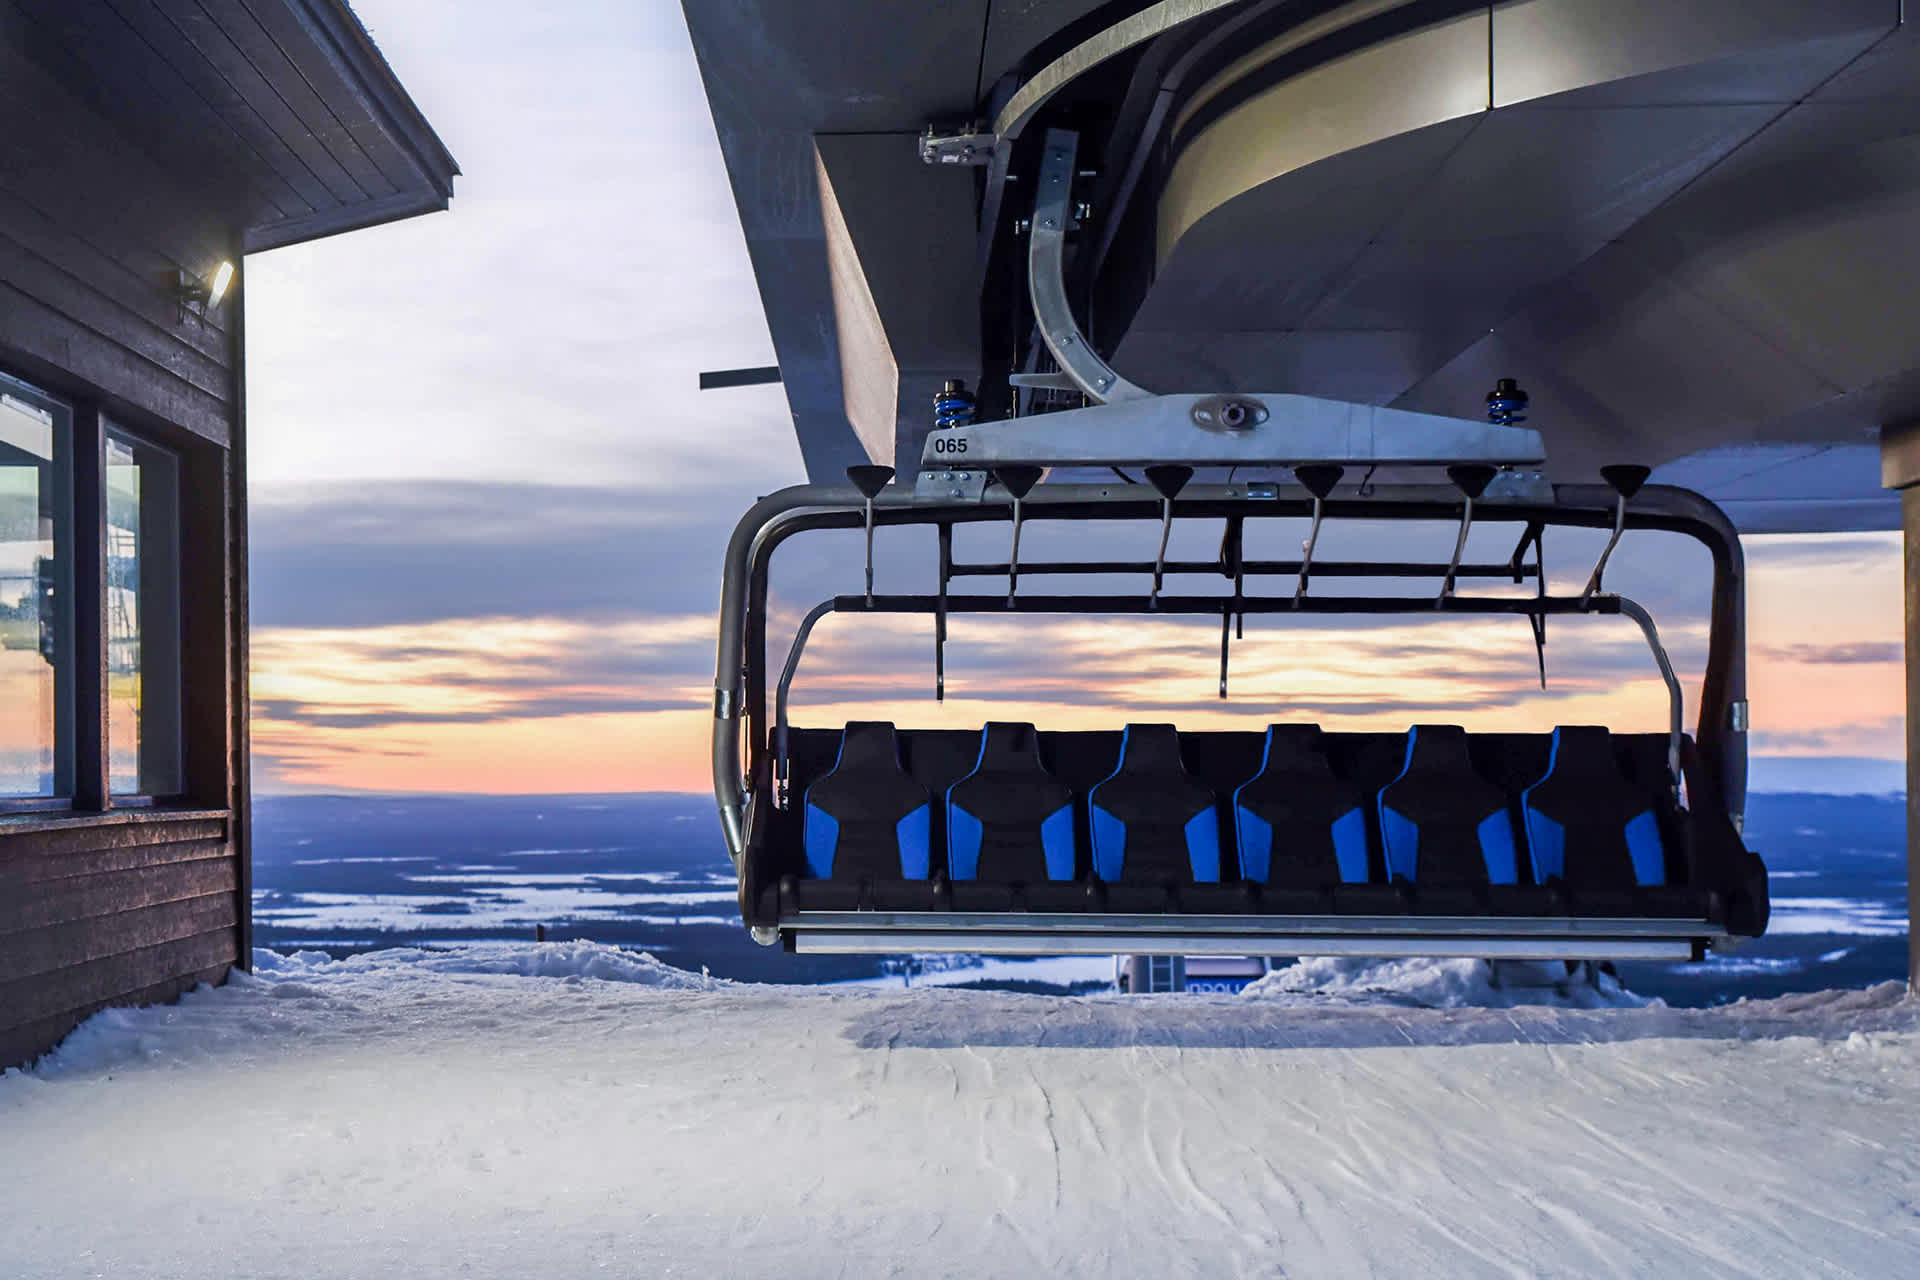 Levi will celebrate the opening of the new Glacier Express chairlift on  December 3, 2022